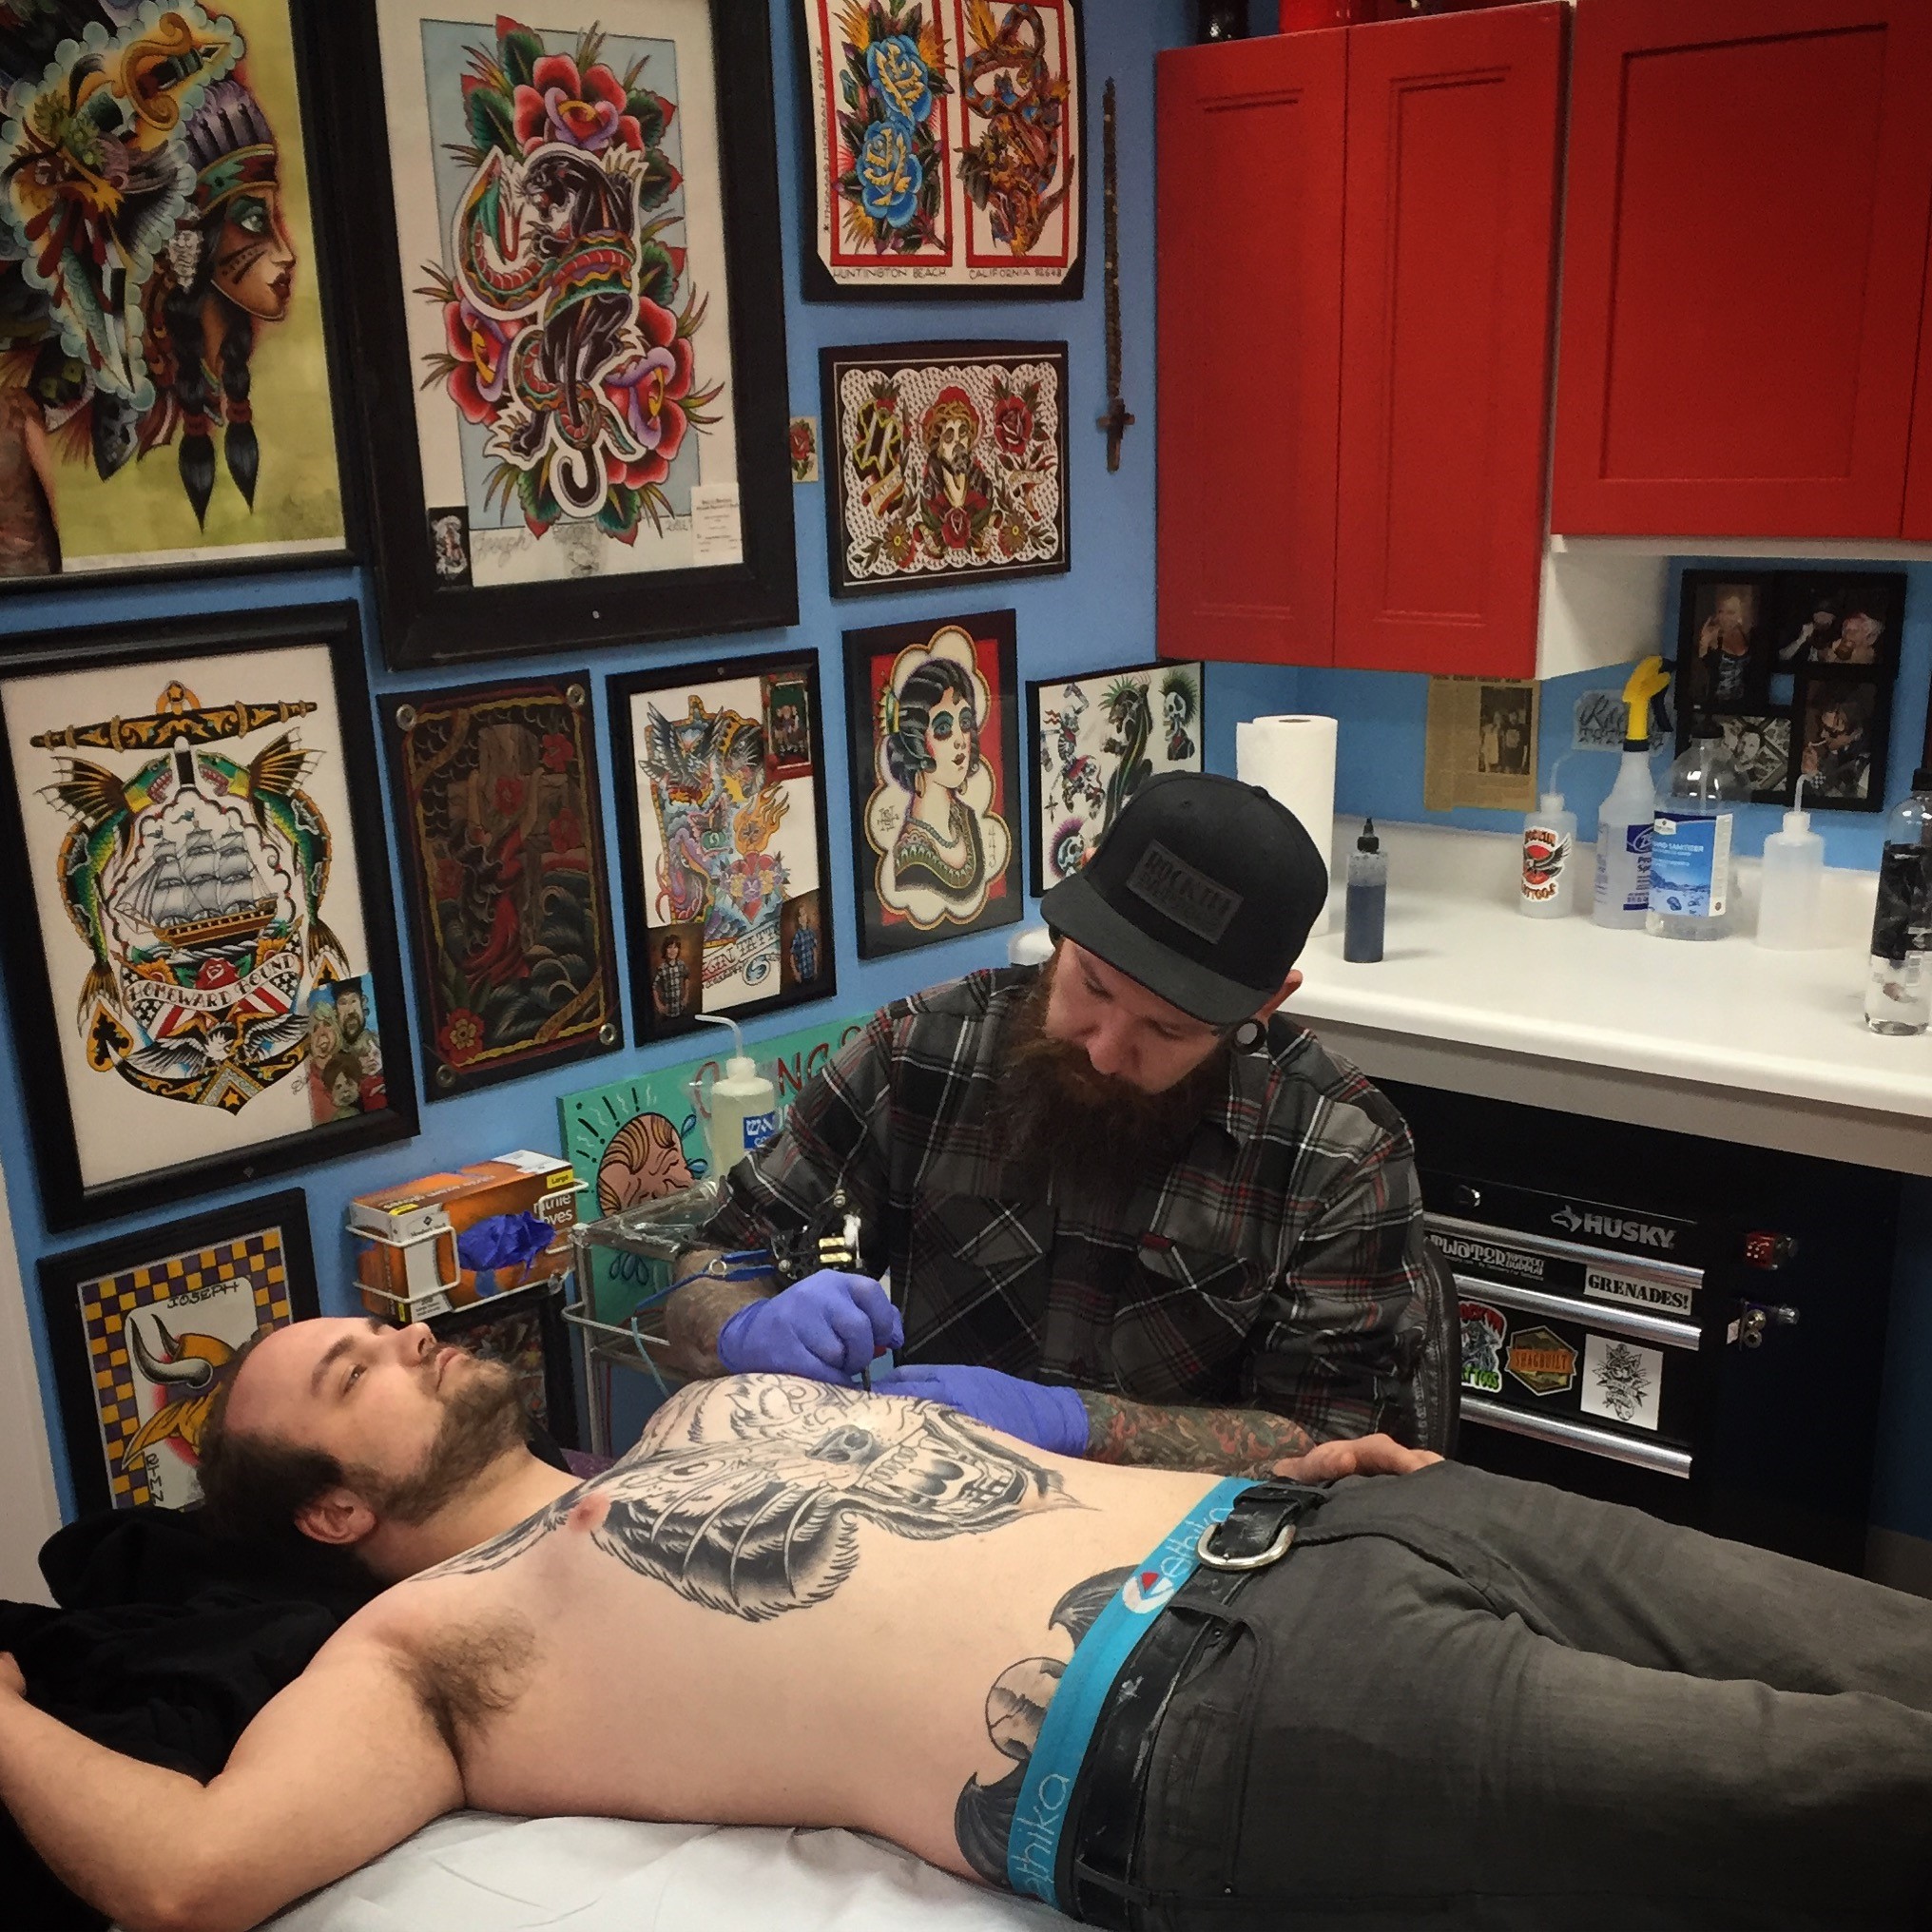 Schedule your next appointment with one of our skilled artists!